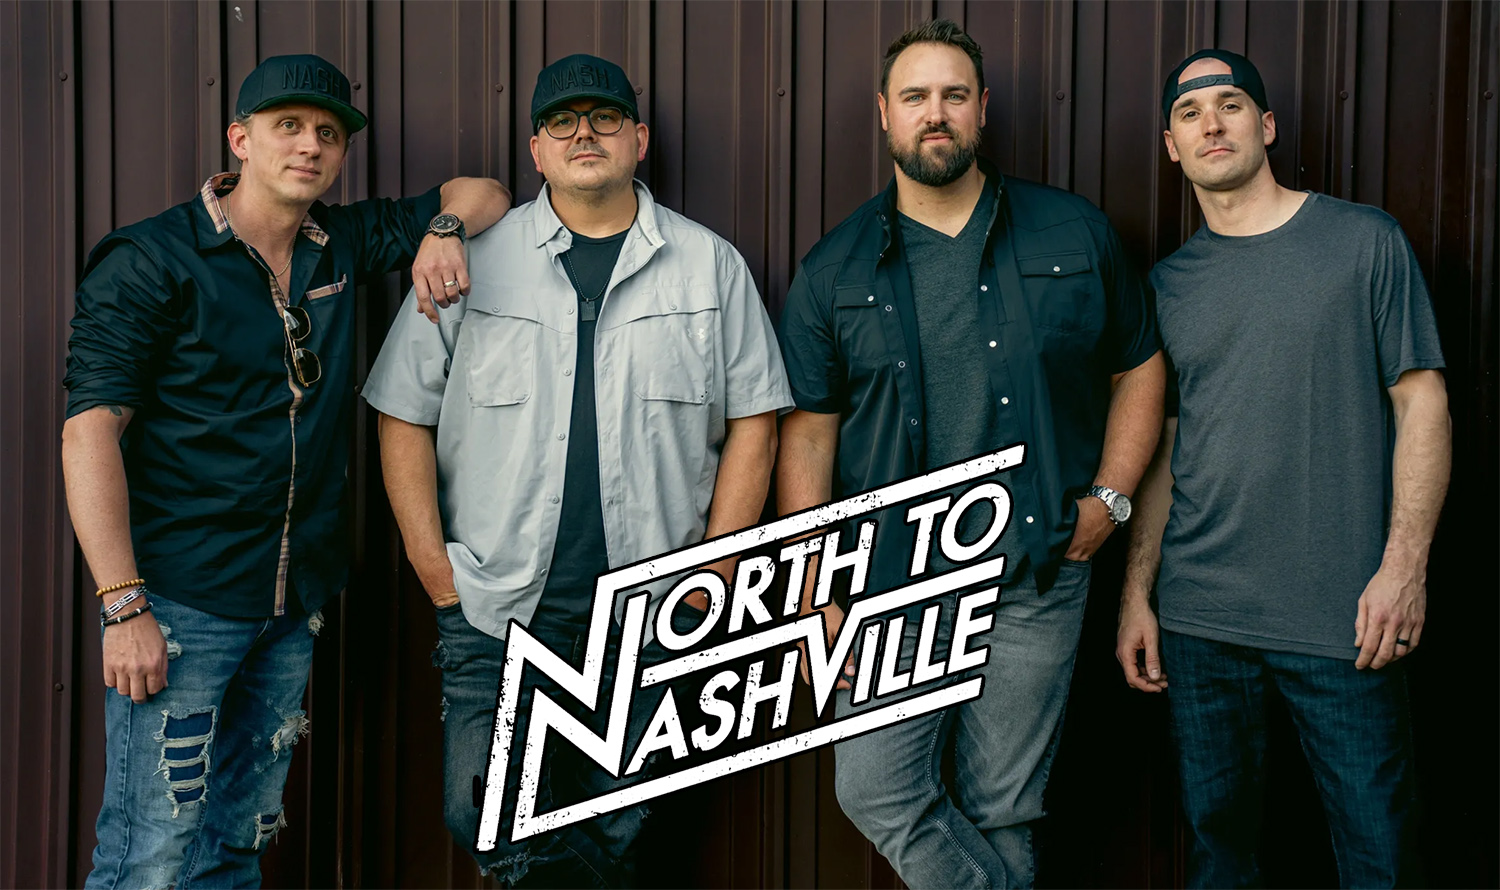 north to nashville performing at the ohio eggfest